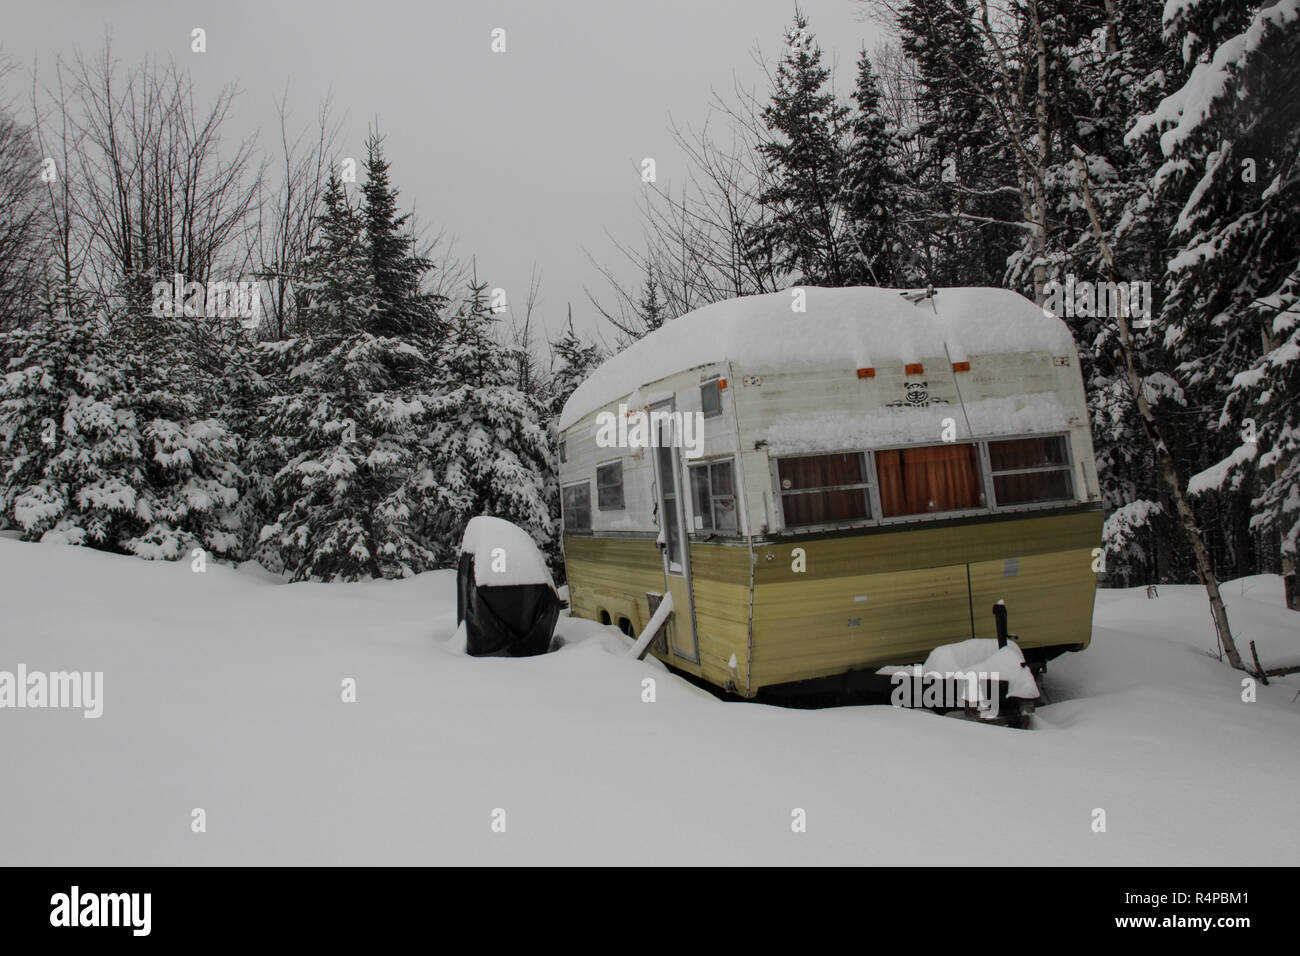 An old camper trailer covered in snow in the woods Stock Photo